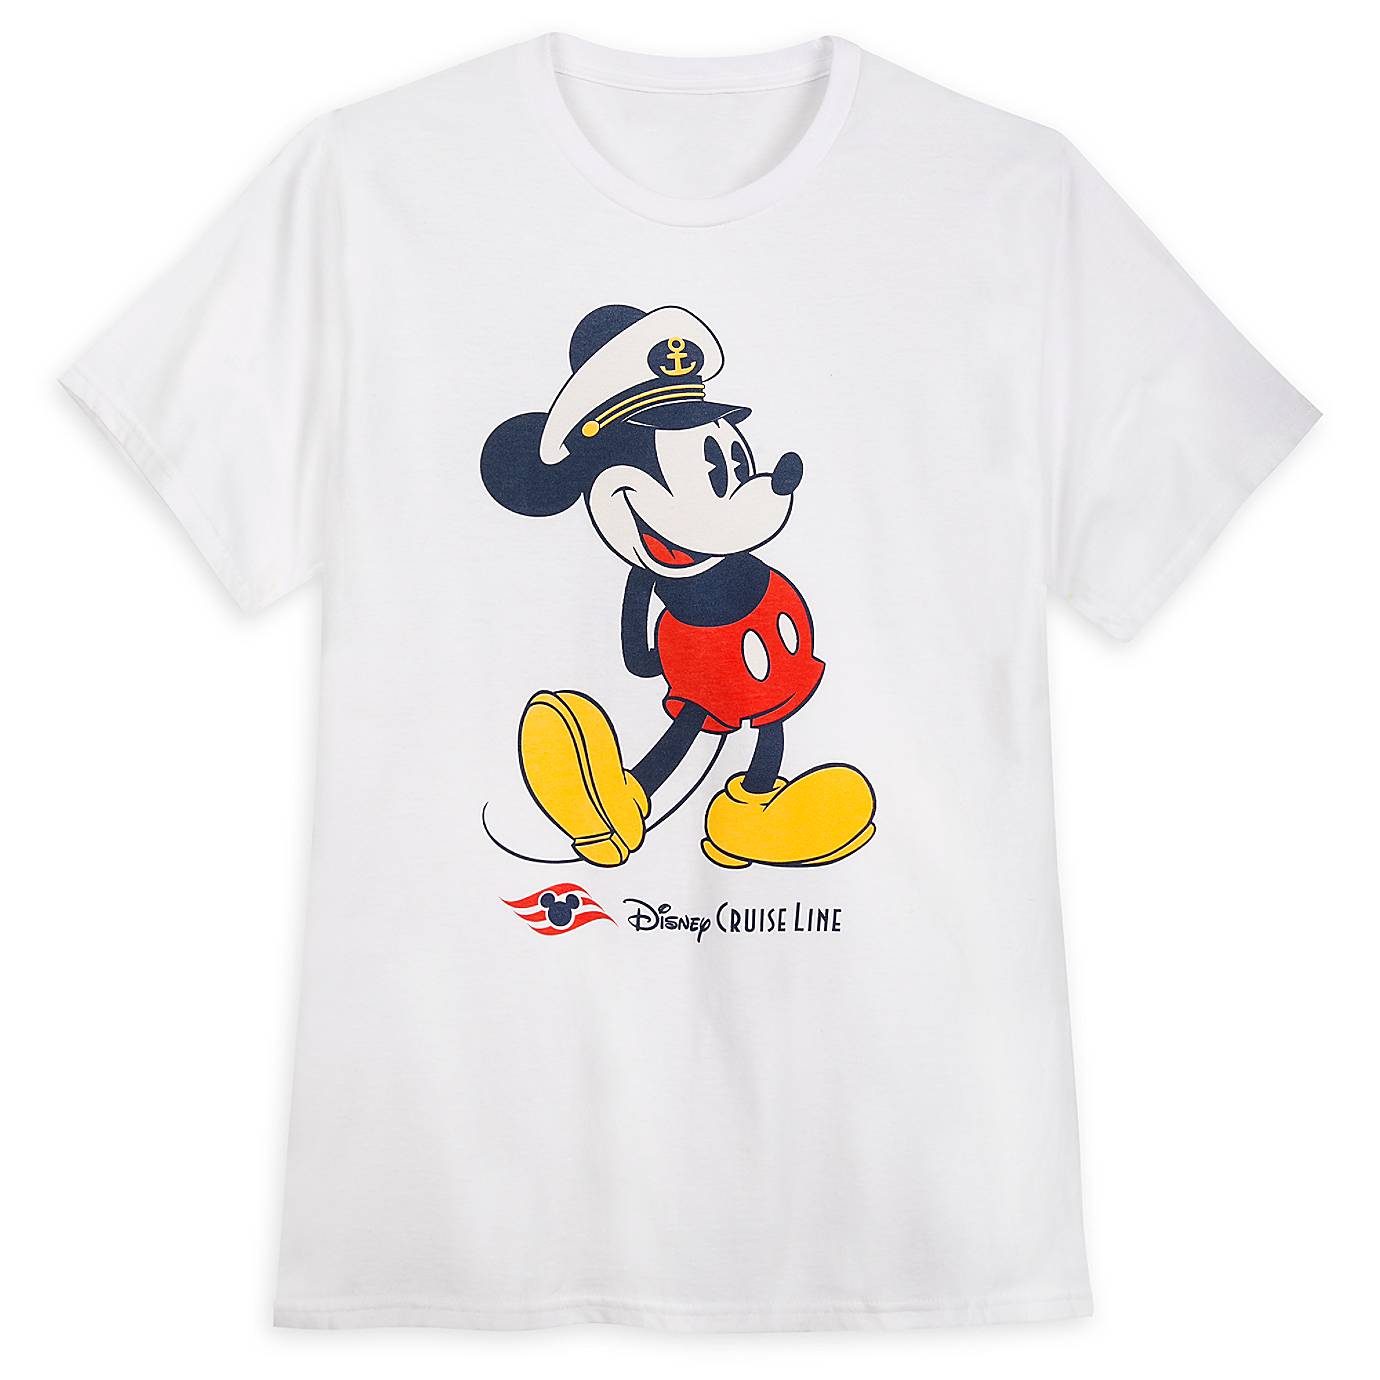 KEEP CALM GOING ON A DISNEY CRUISE MICKEY MINNIE VACATION SHIRT IRON ON TRANSFER 